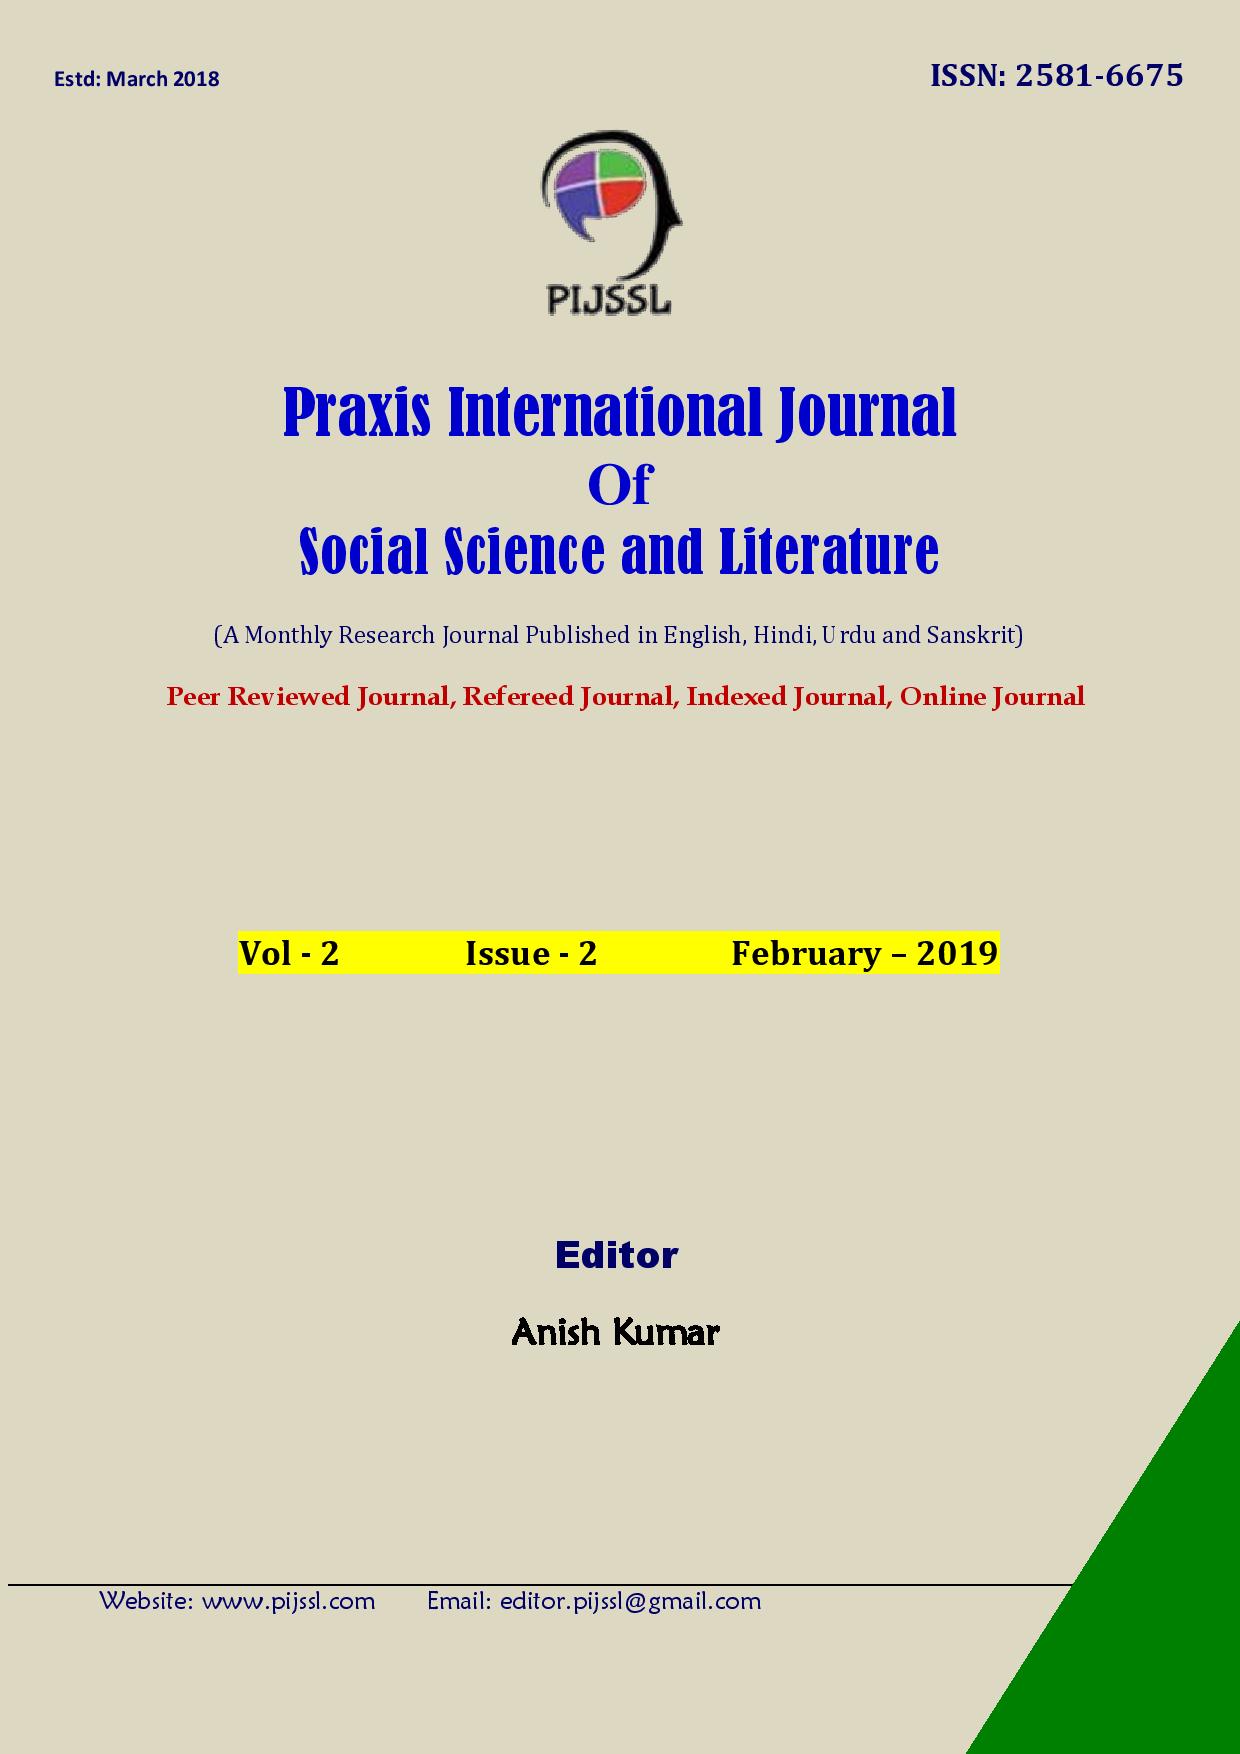 A Monthly Research Journal Published in English, Hindi, Urdu and Sanskrit